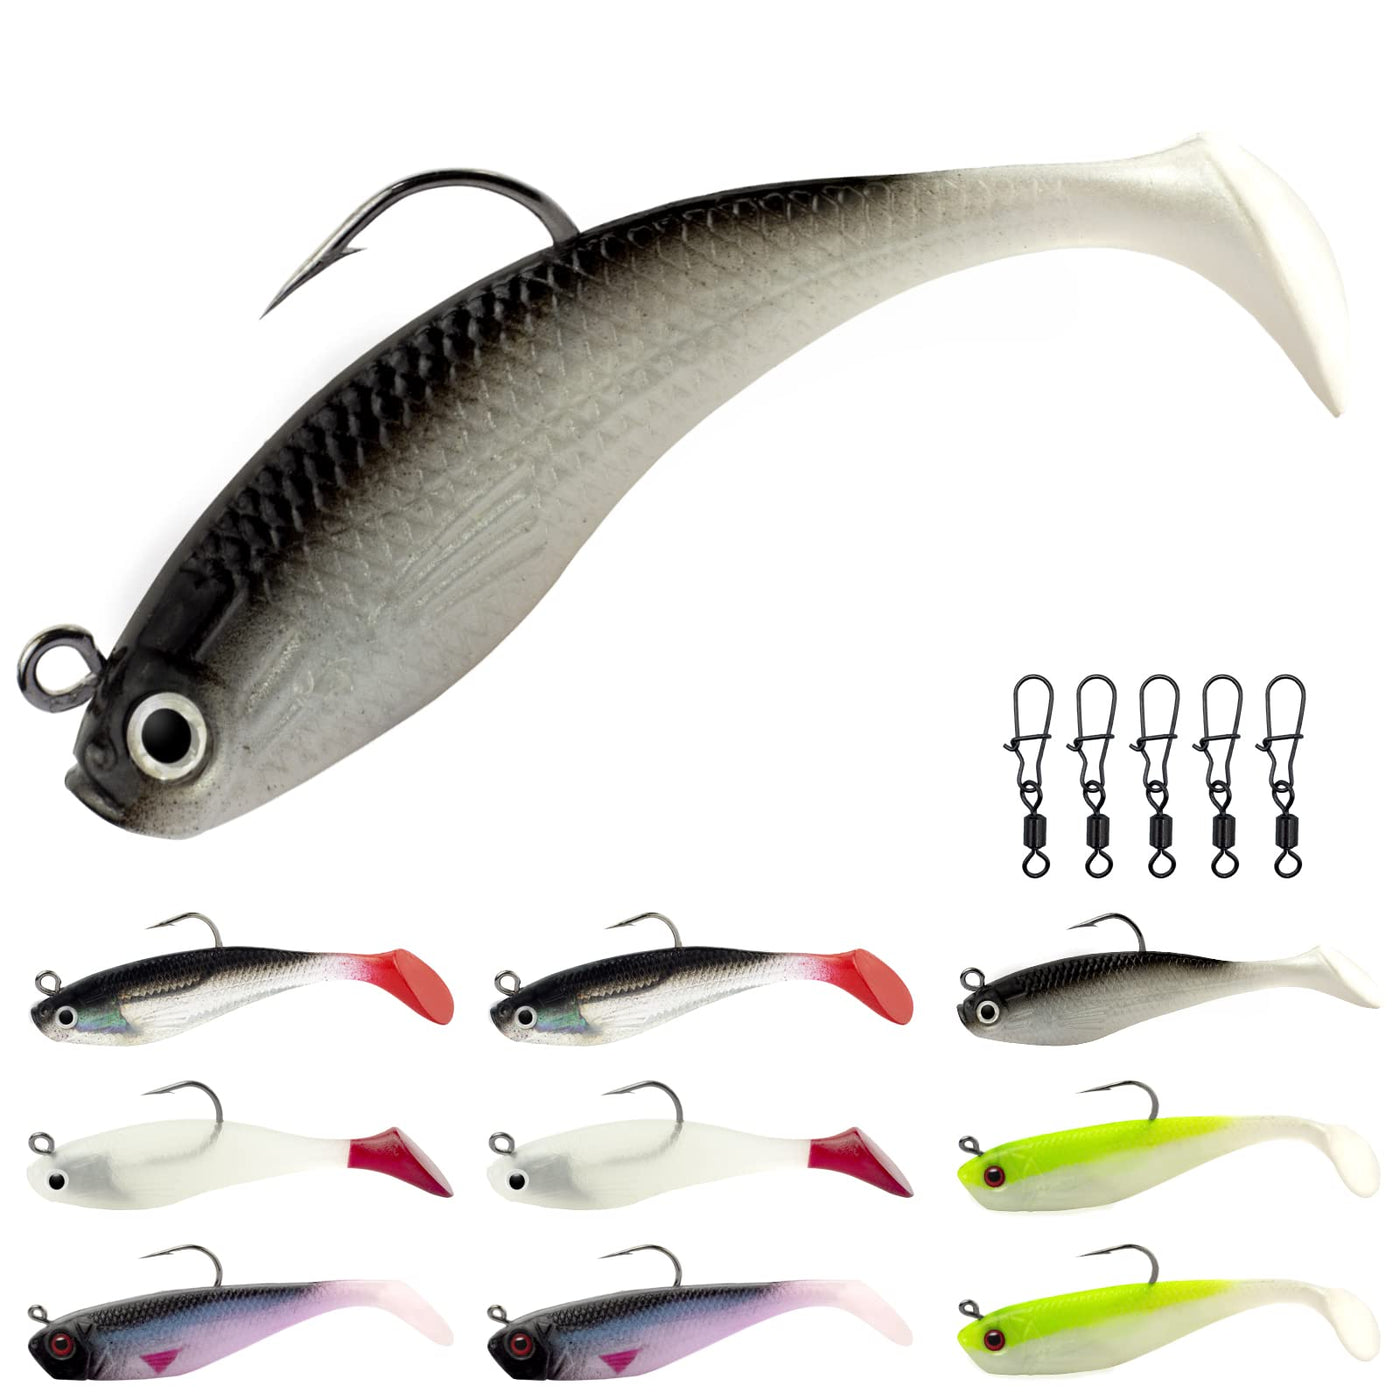 HOBOHY Fishing Lures, Soft Lure Swimbaits with Paddle Tail with